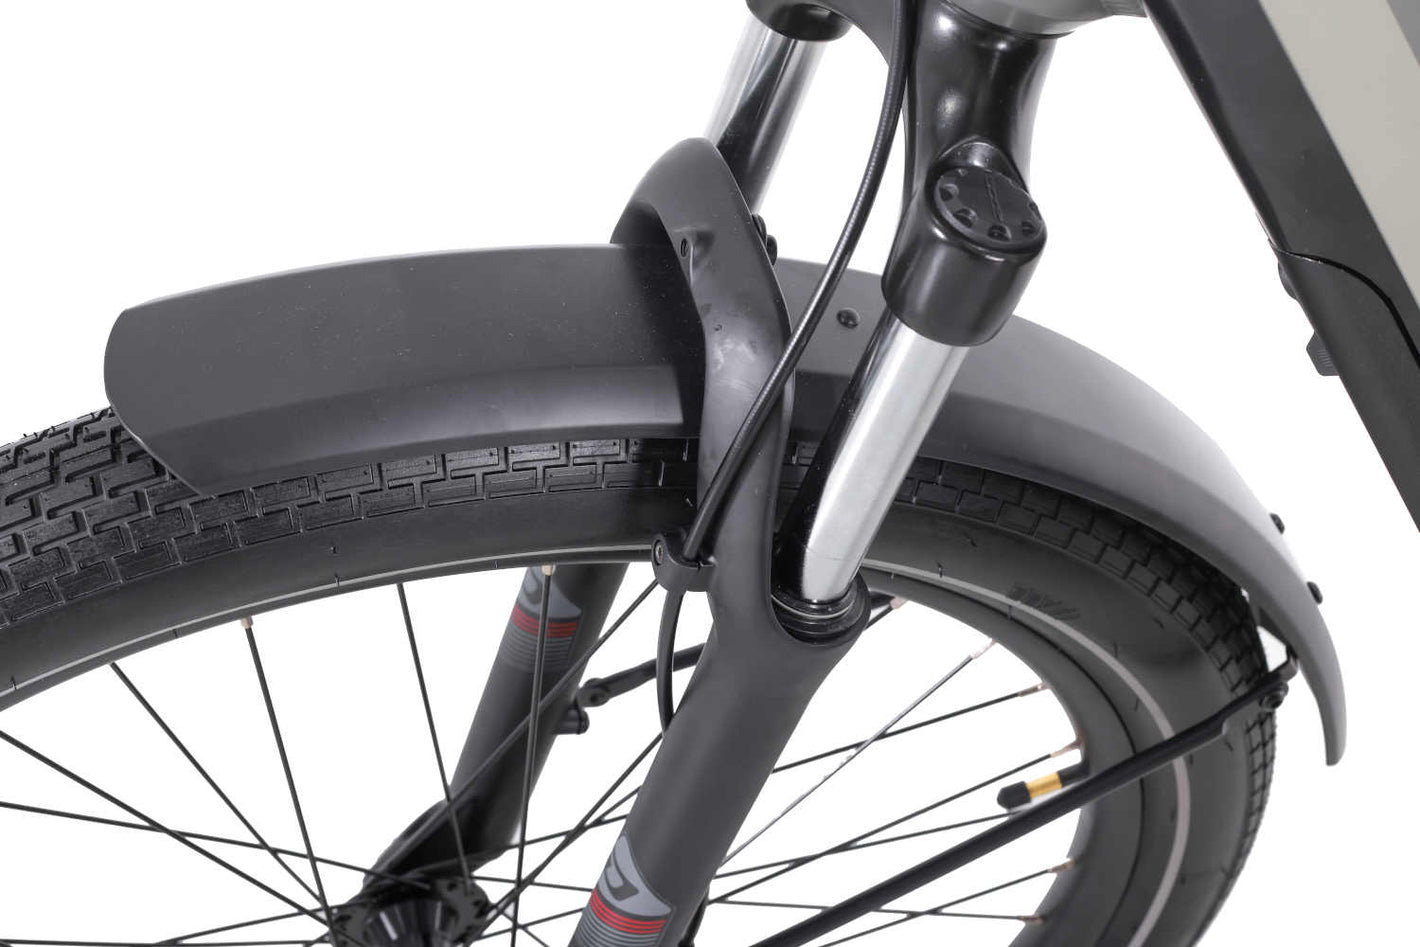 A Zoom suspension fork smooths out bumps at the front end of the Commute Model 1.